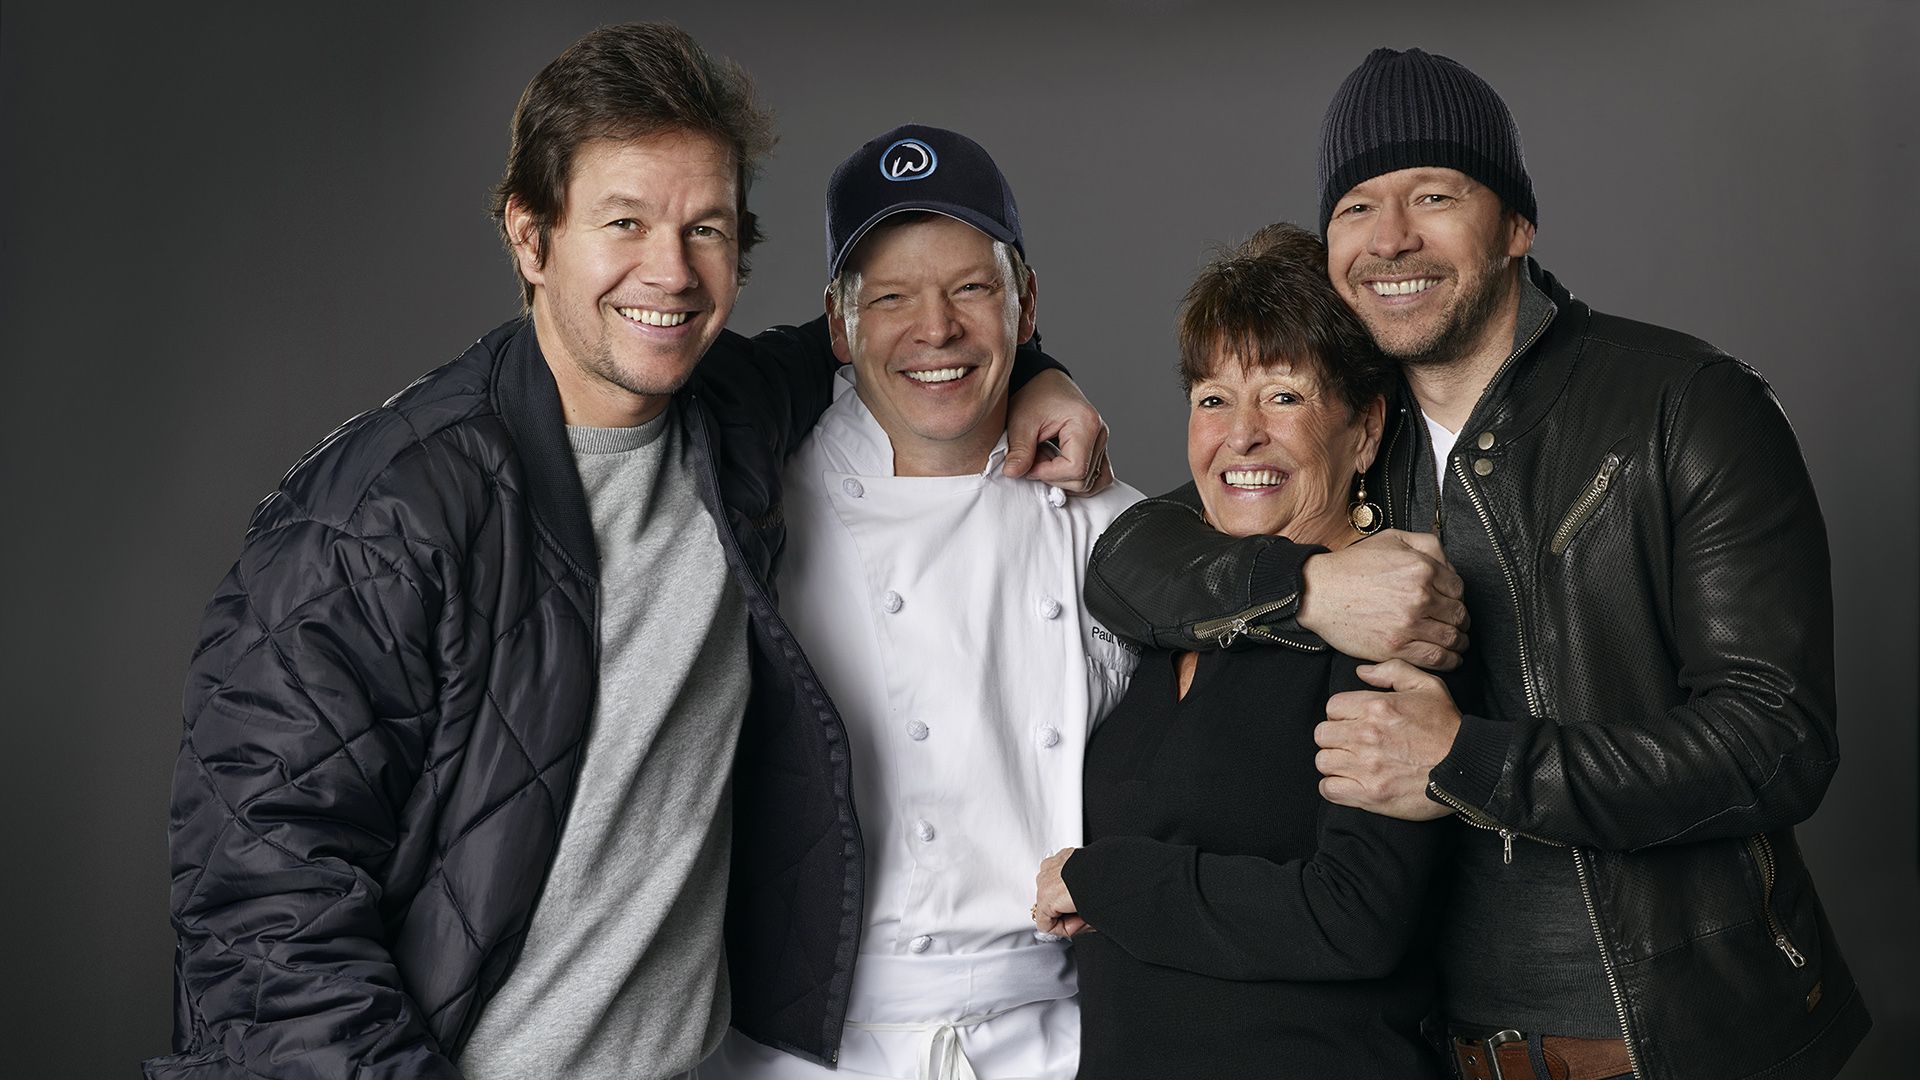 Wahlburgers background